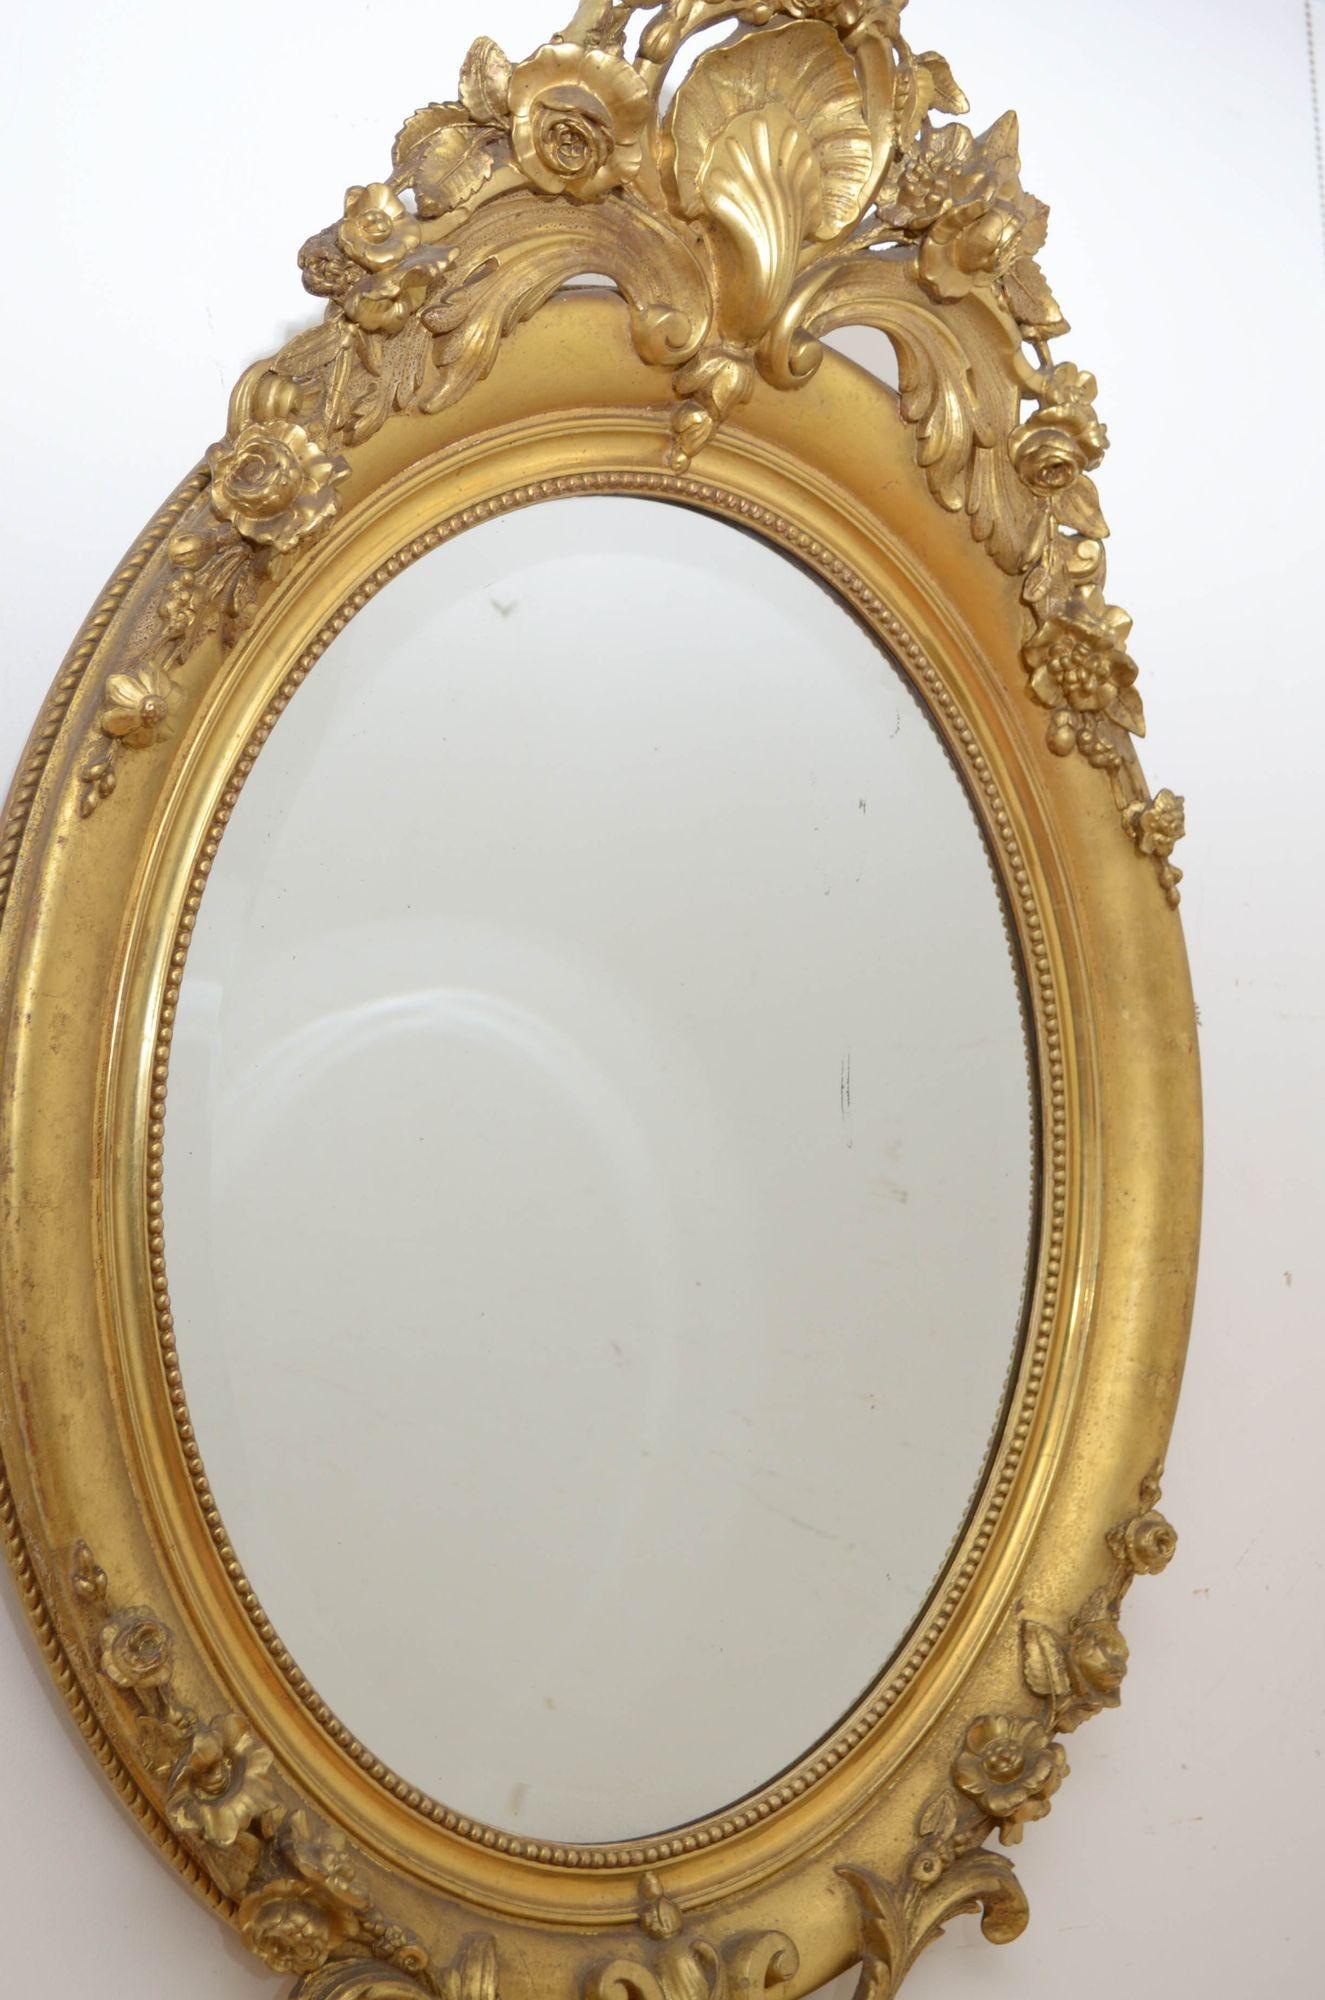 Fine 19th Century Wall Mirror In Good Condition For Sale In Whaley Bridge, GB